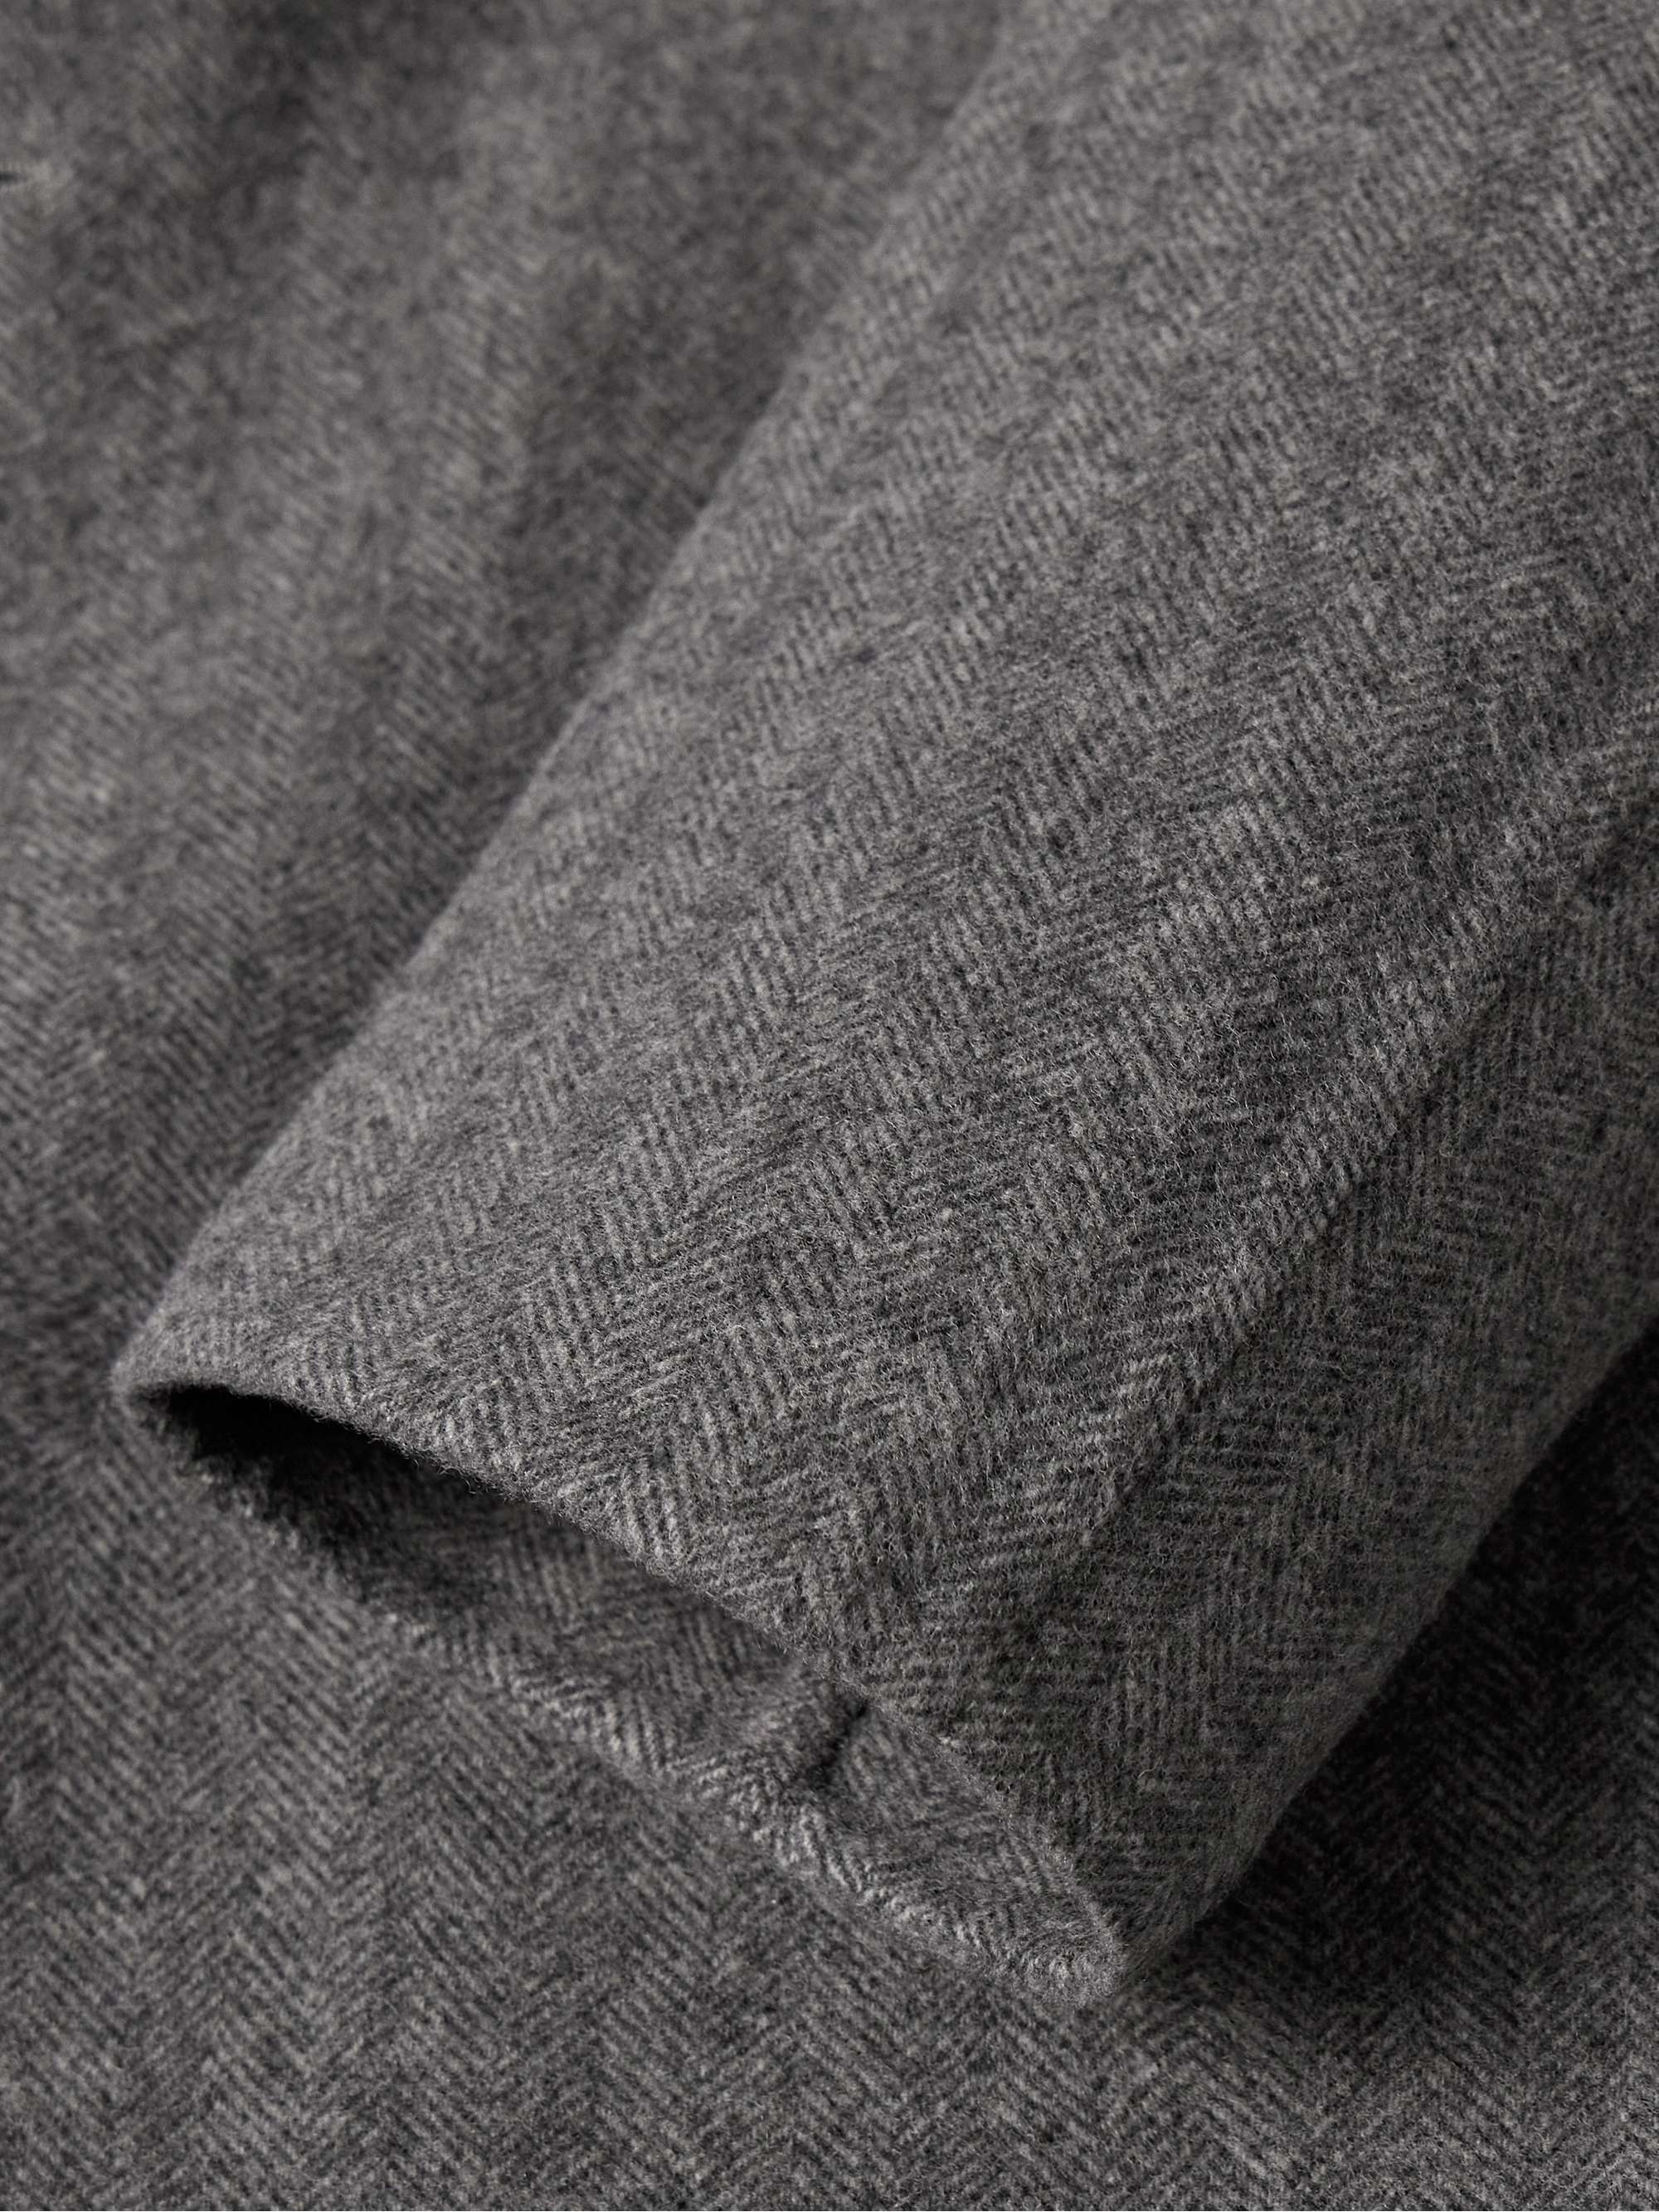 DUNHILL Unstructured Double-Faced Herringbone Wool Car Coat for Men ...